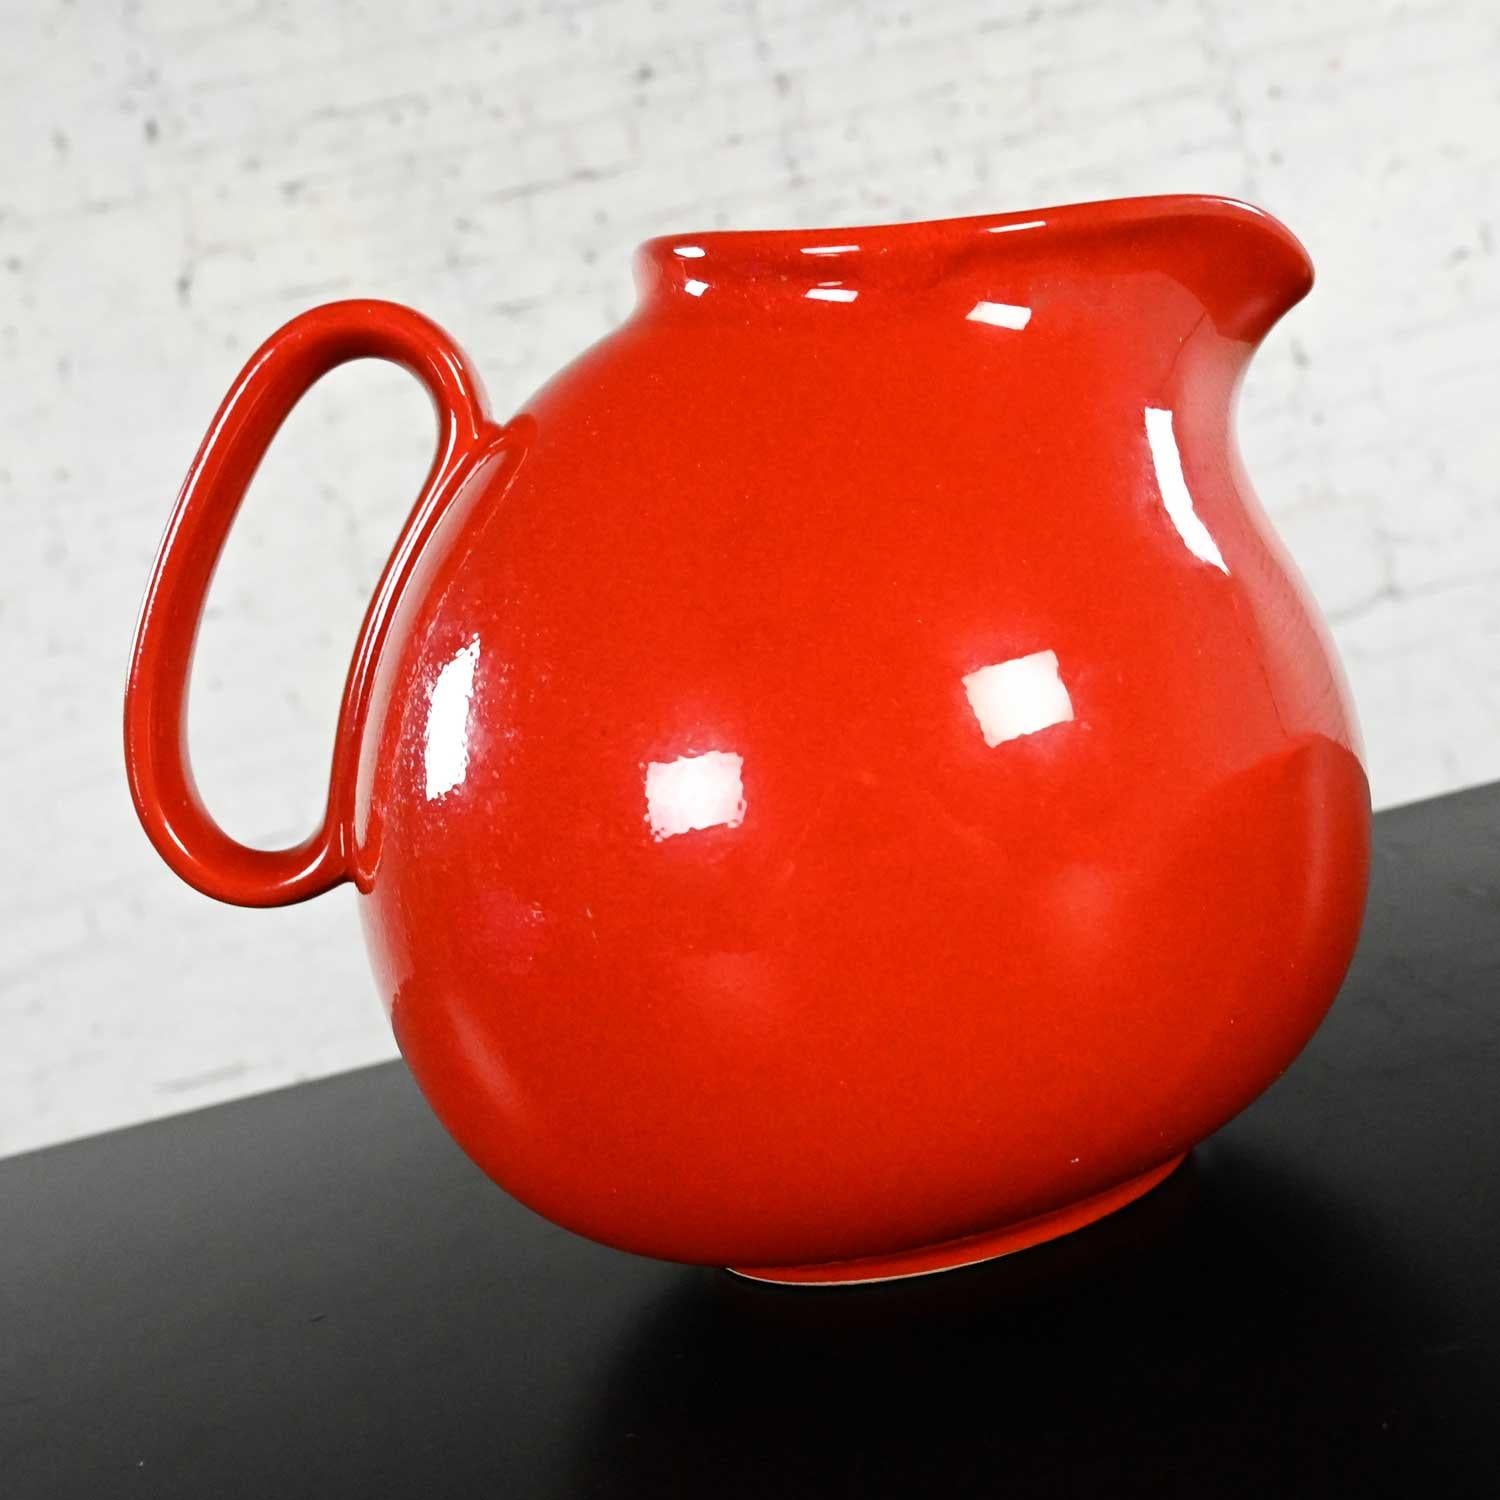 Vintage Red Pitcher by Waechtersbach Germany & Blue Hall Sundial Casserole Dish In Good Condition For Sale In Topeka, KS